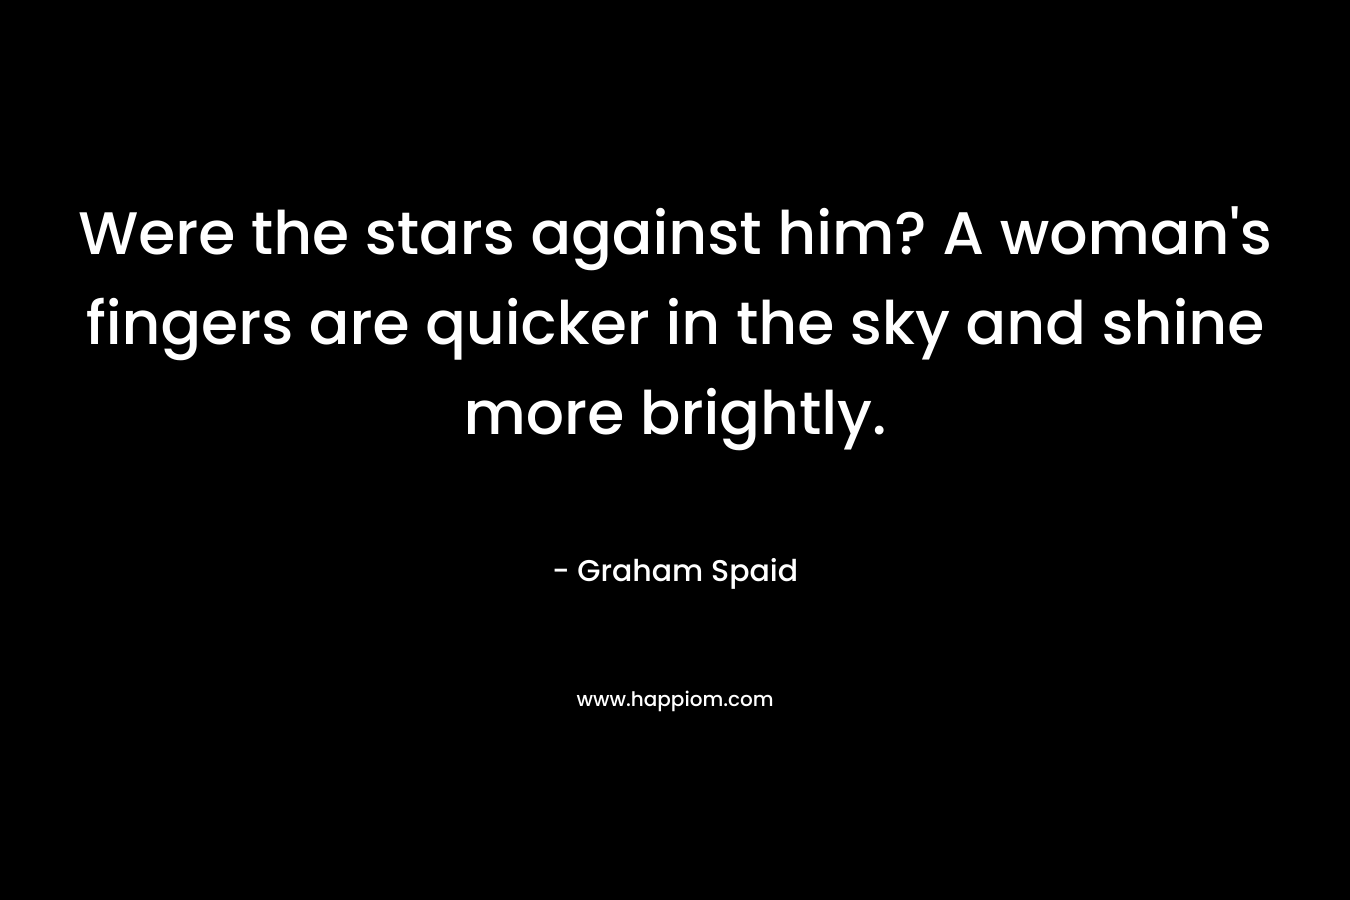 Were the stars against him? A woman's fingers are quicker in the sky and shine more brightly.